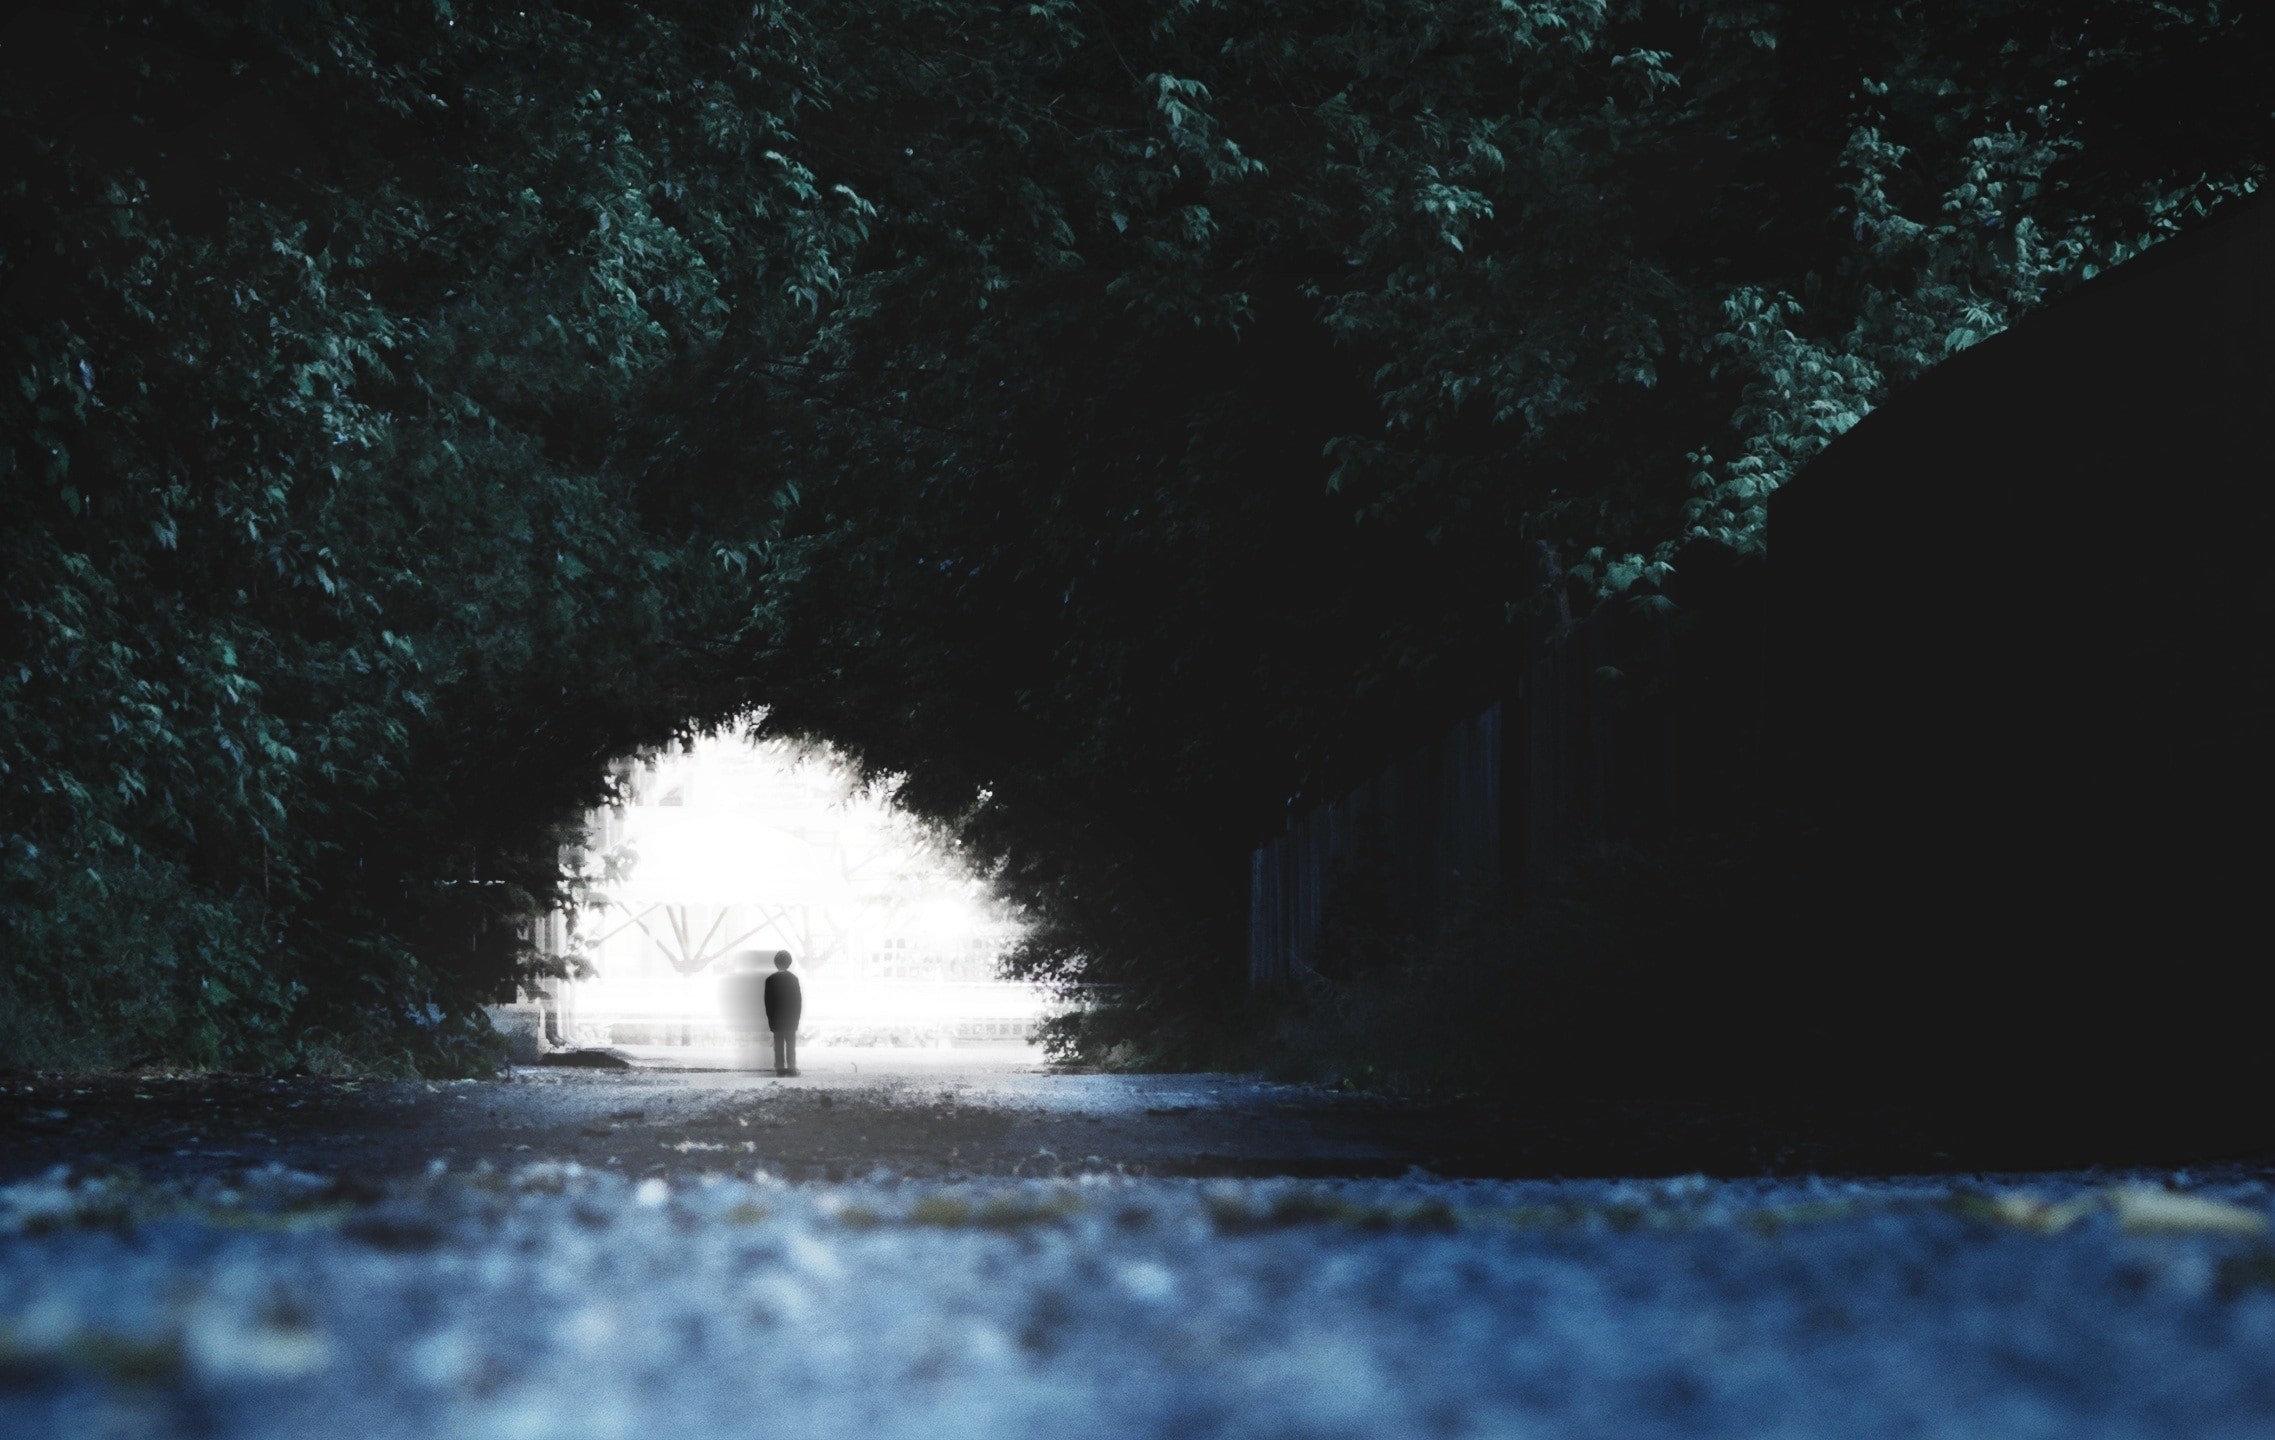 2275x1440 silhouette of a man on a tunnel free image | Peakpx